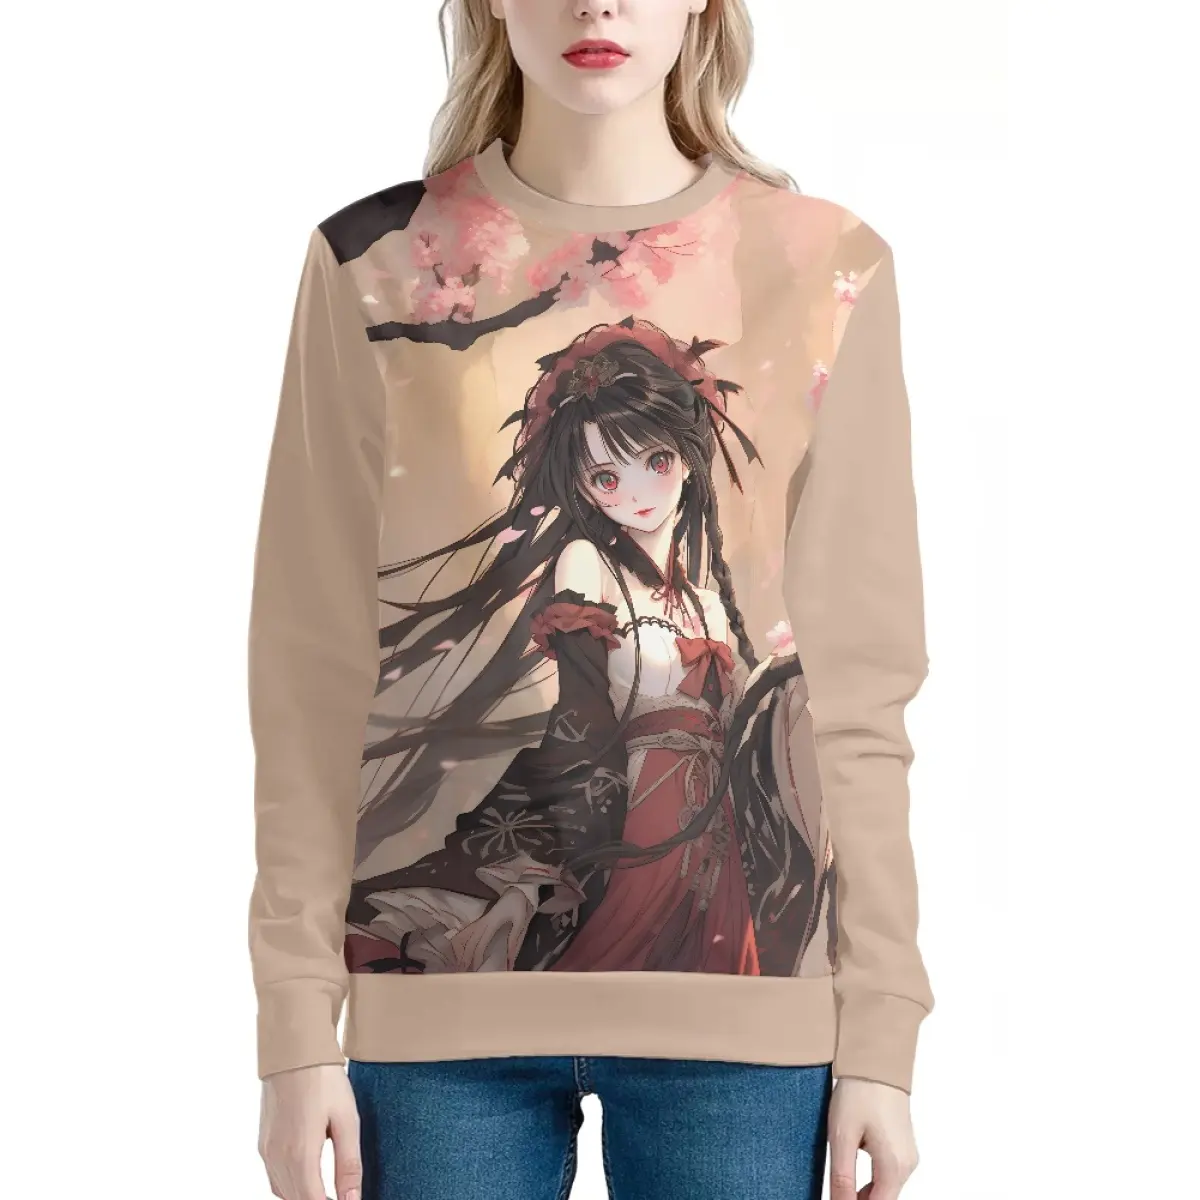 Women Round Neck Sweater Cartoon Style Print Japanese Anime Girl Under The Flower Sweatshirt Without Hoodie Loose Casual Female